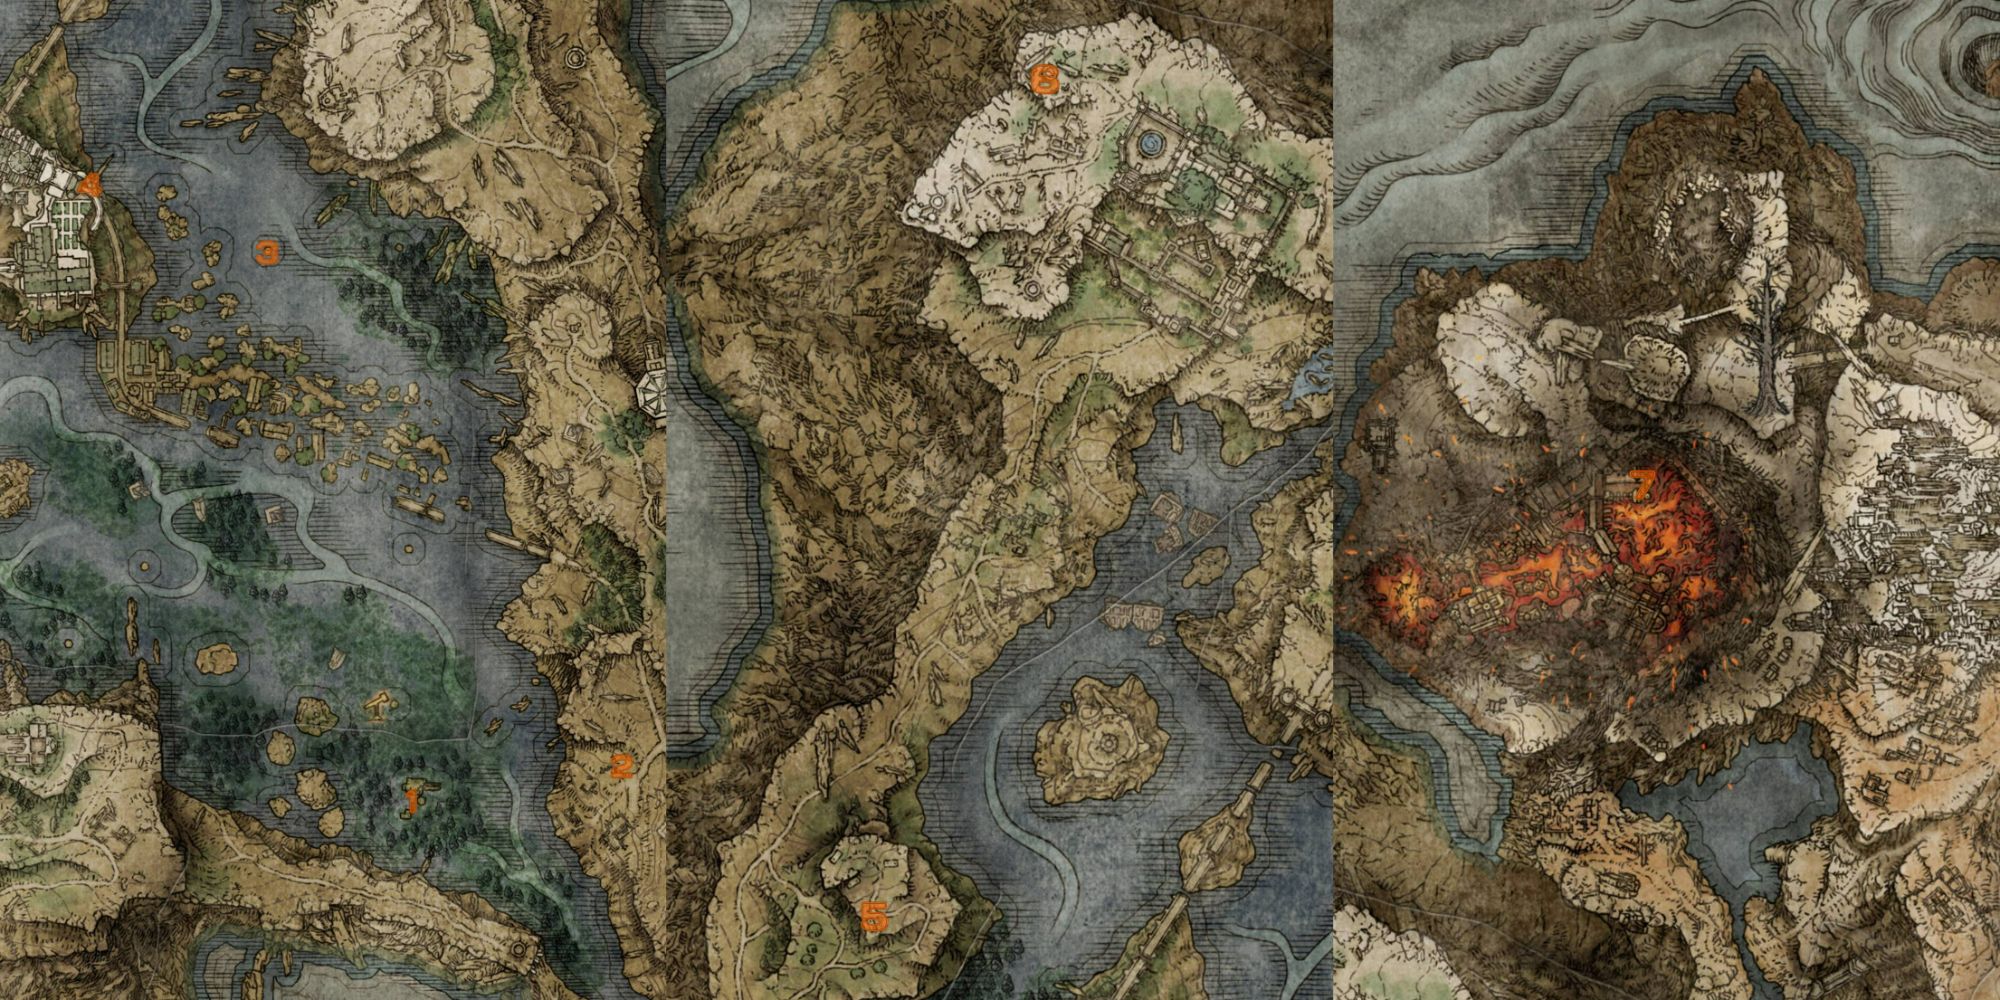 Elden Ring Liurnia of the Lakes split image with teleport locations